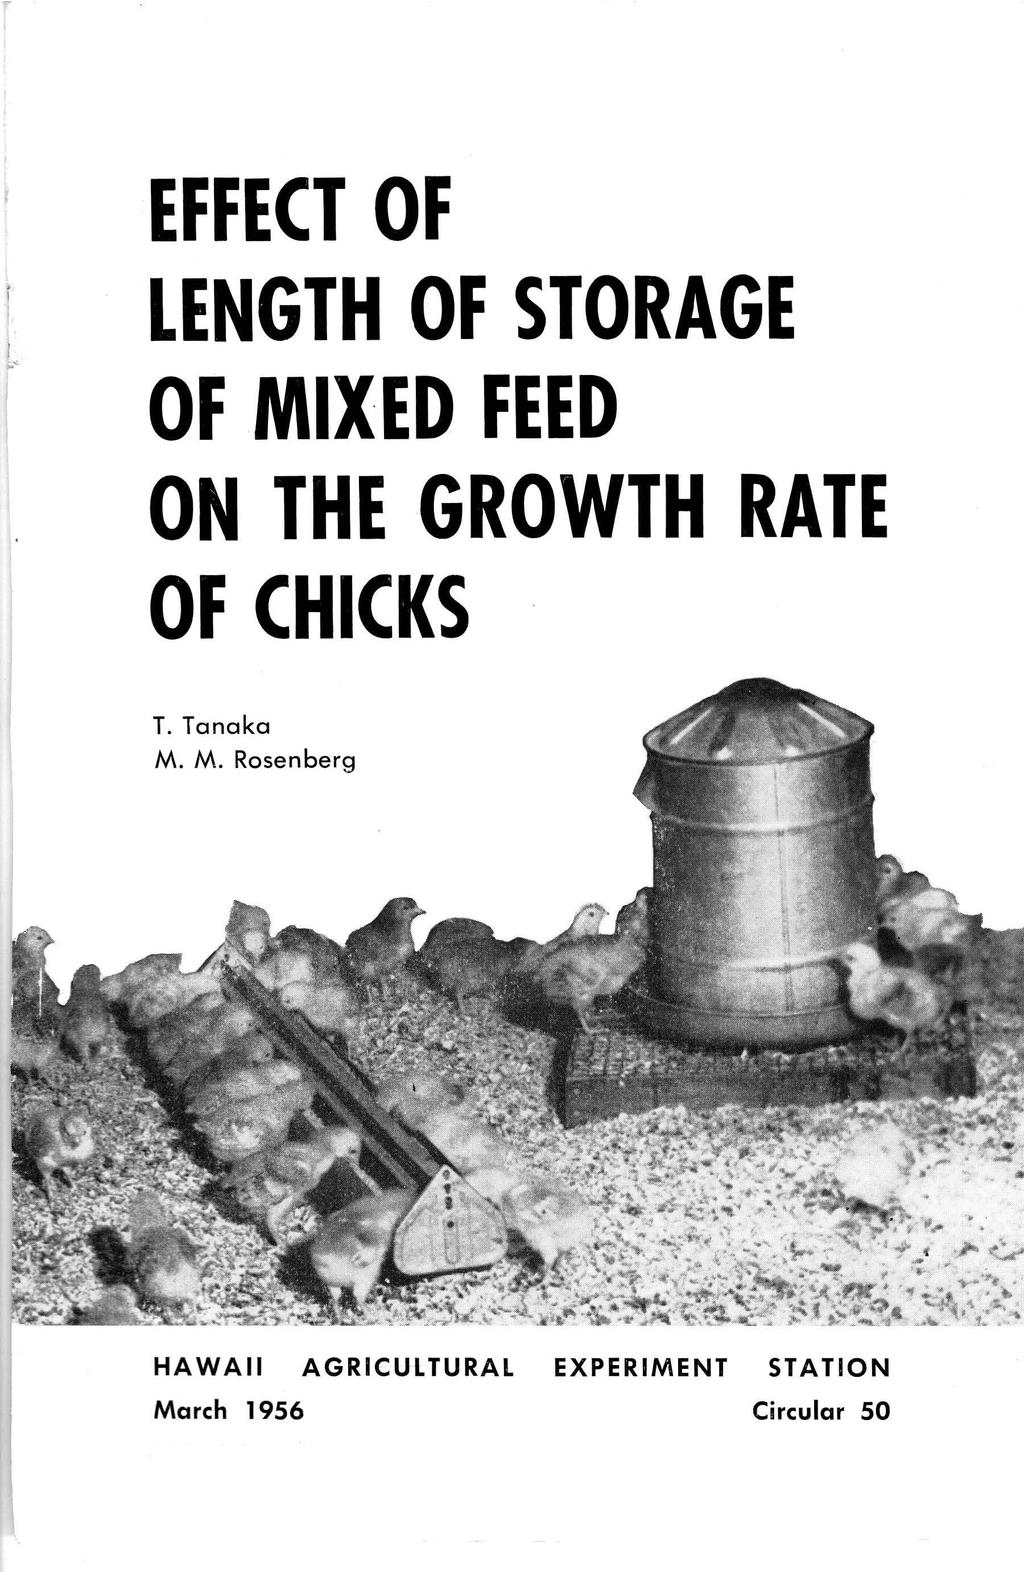 EFFECT OF LENGTH OF STORAGE OF MIXED FEED ON THE GROWTH RATE OF CHICKS T.